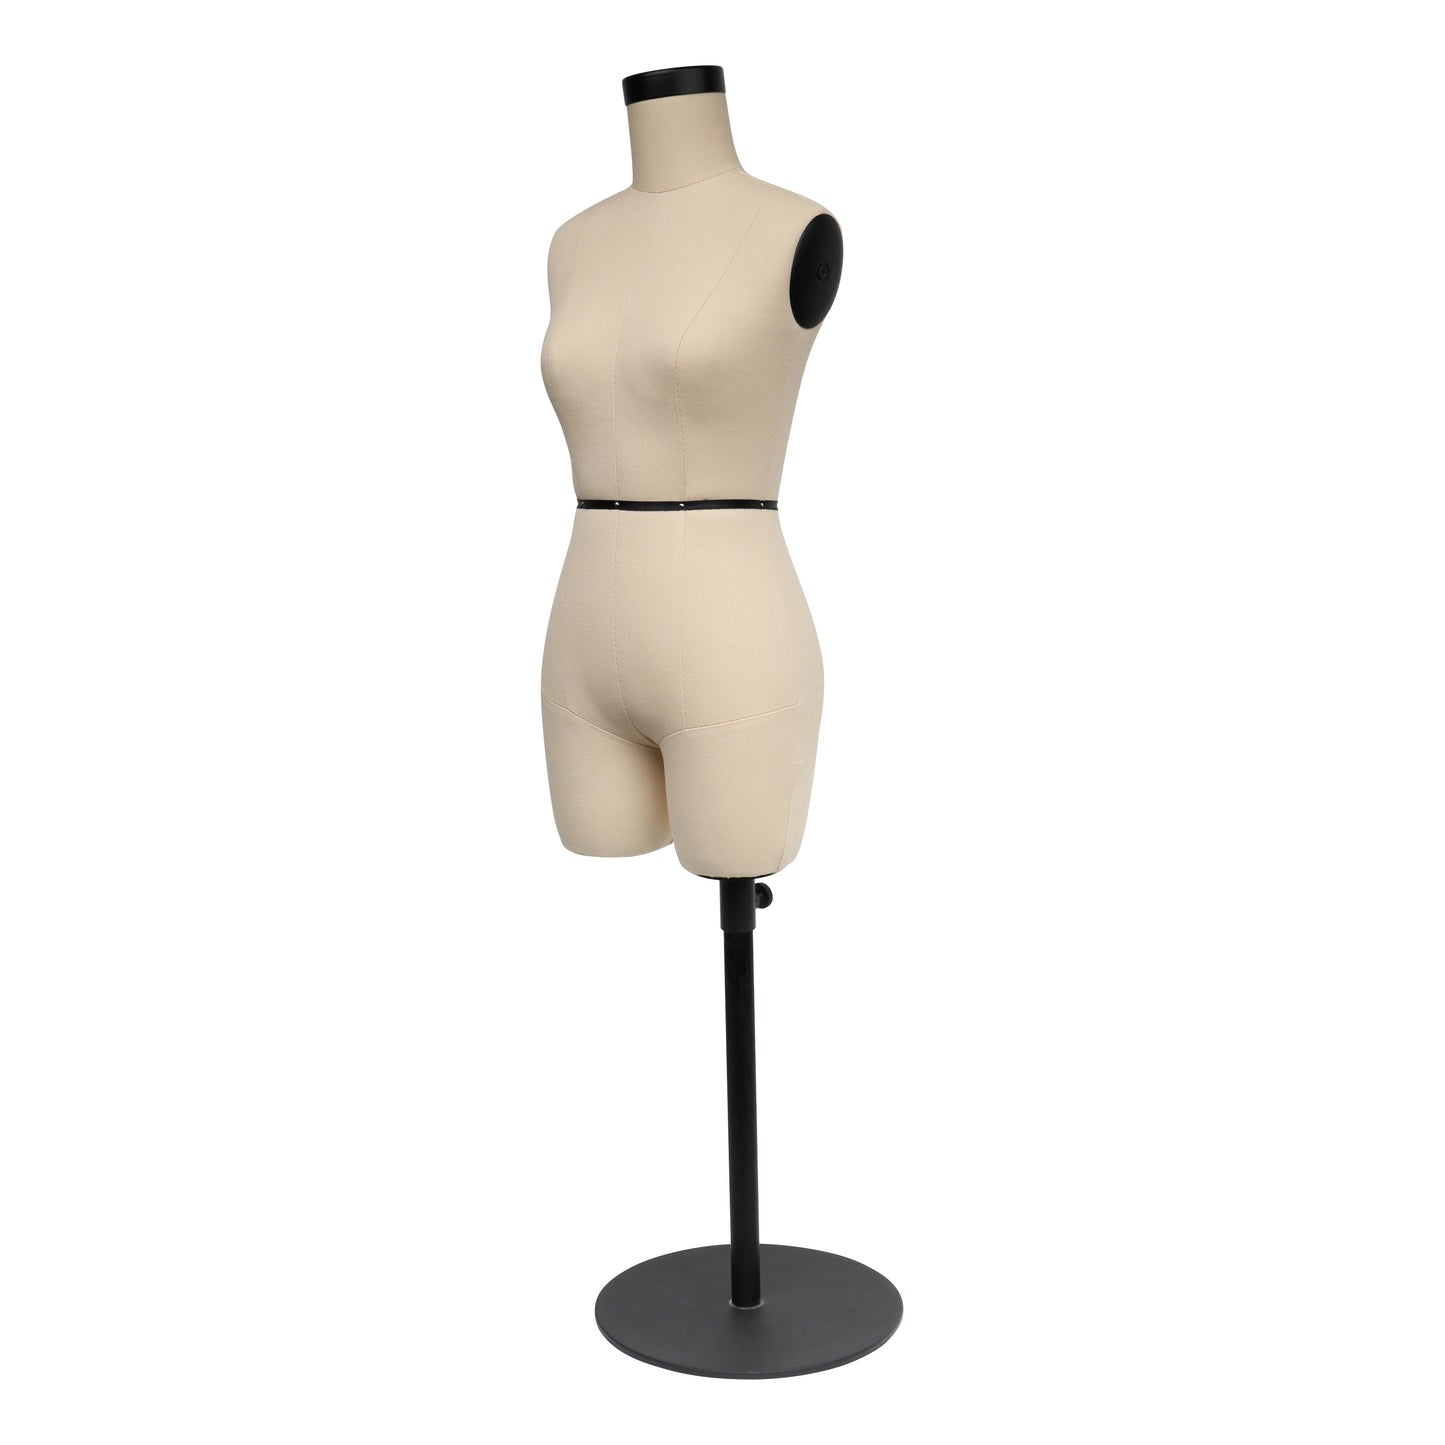 Jelimate Size 6 Female Half Scale Dress Form For Sewing,Mini Tailor Mannequin for Fashion Designer Pattern Making,Miniature Women Sewing Mannequin for Fashion School Draping Mannequin